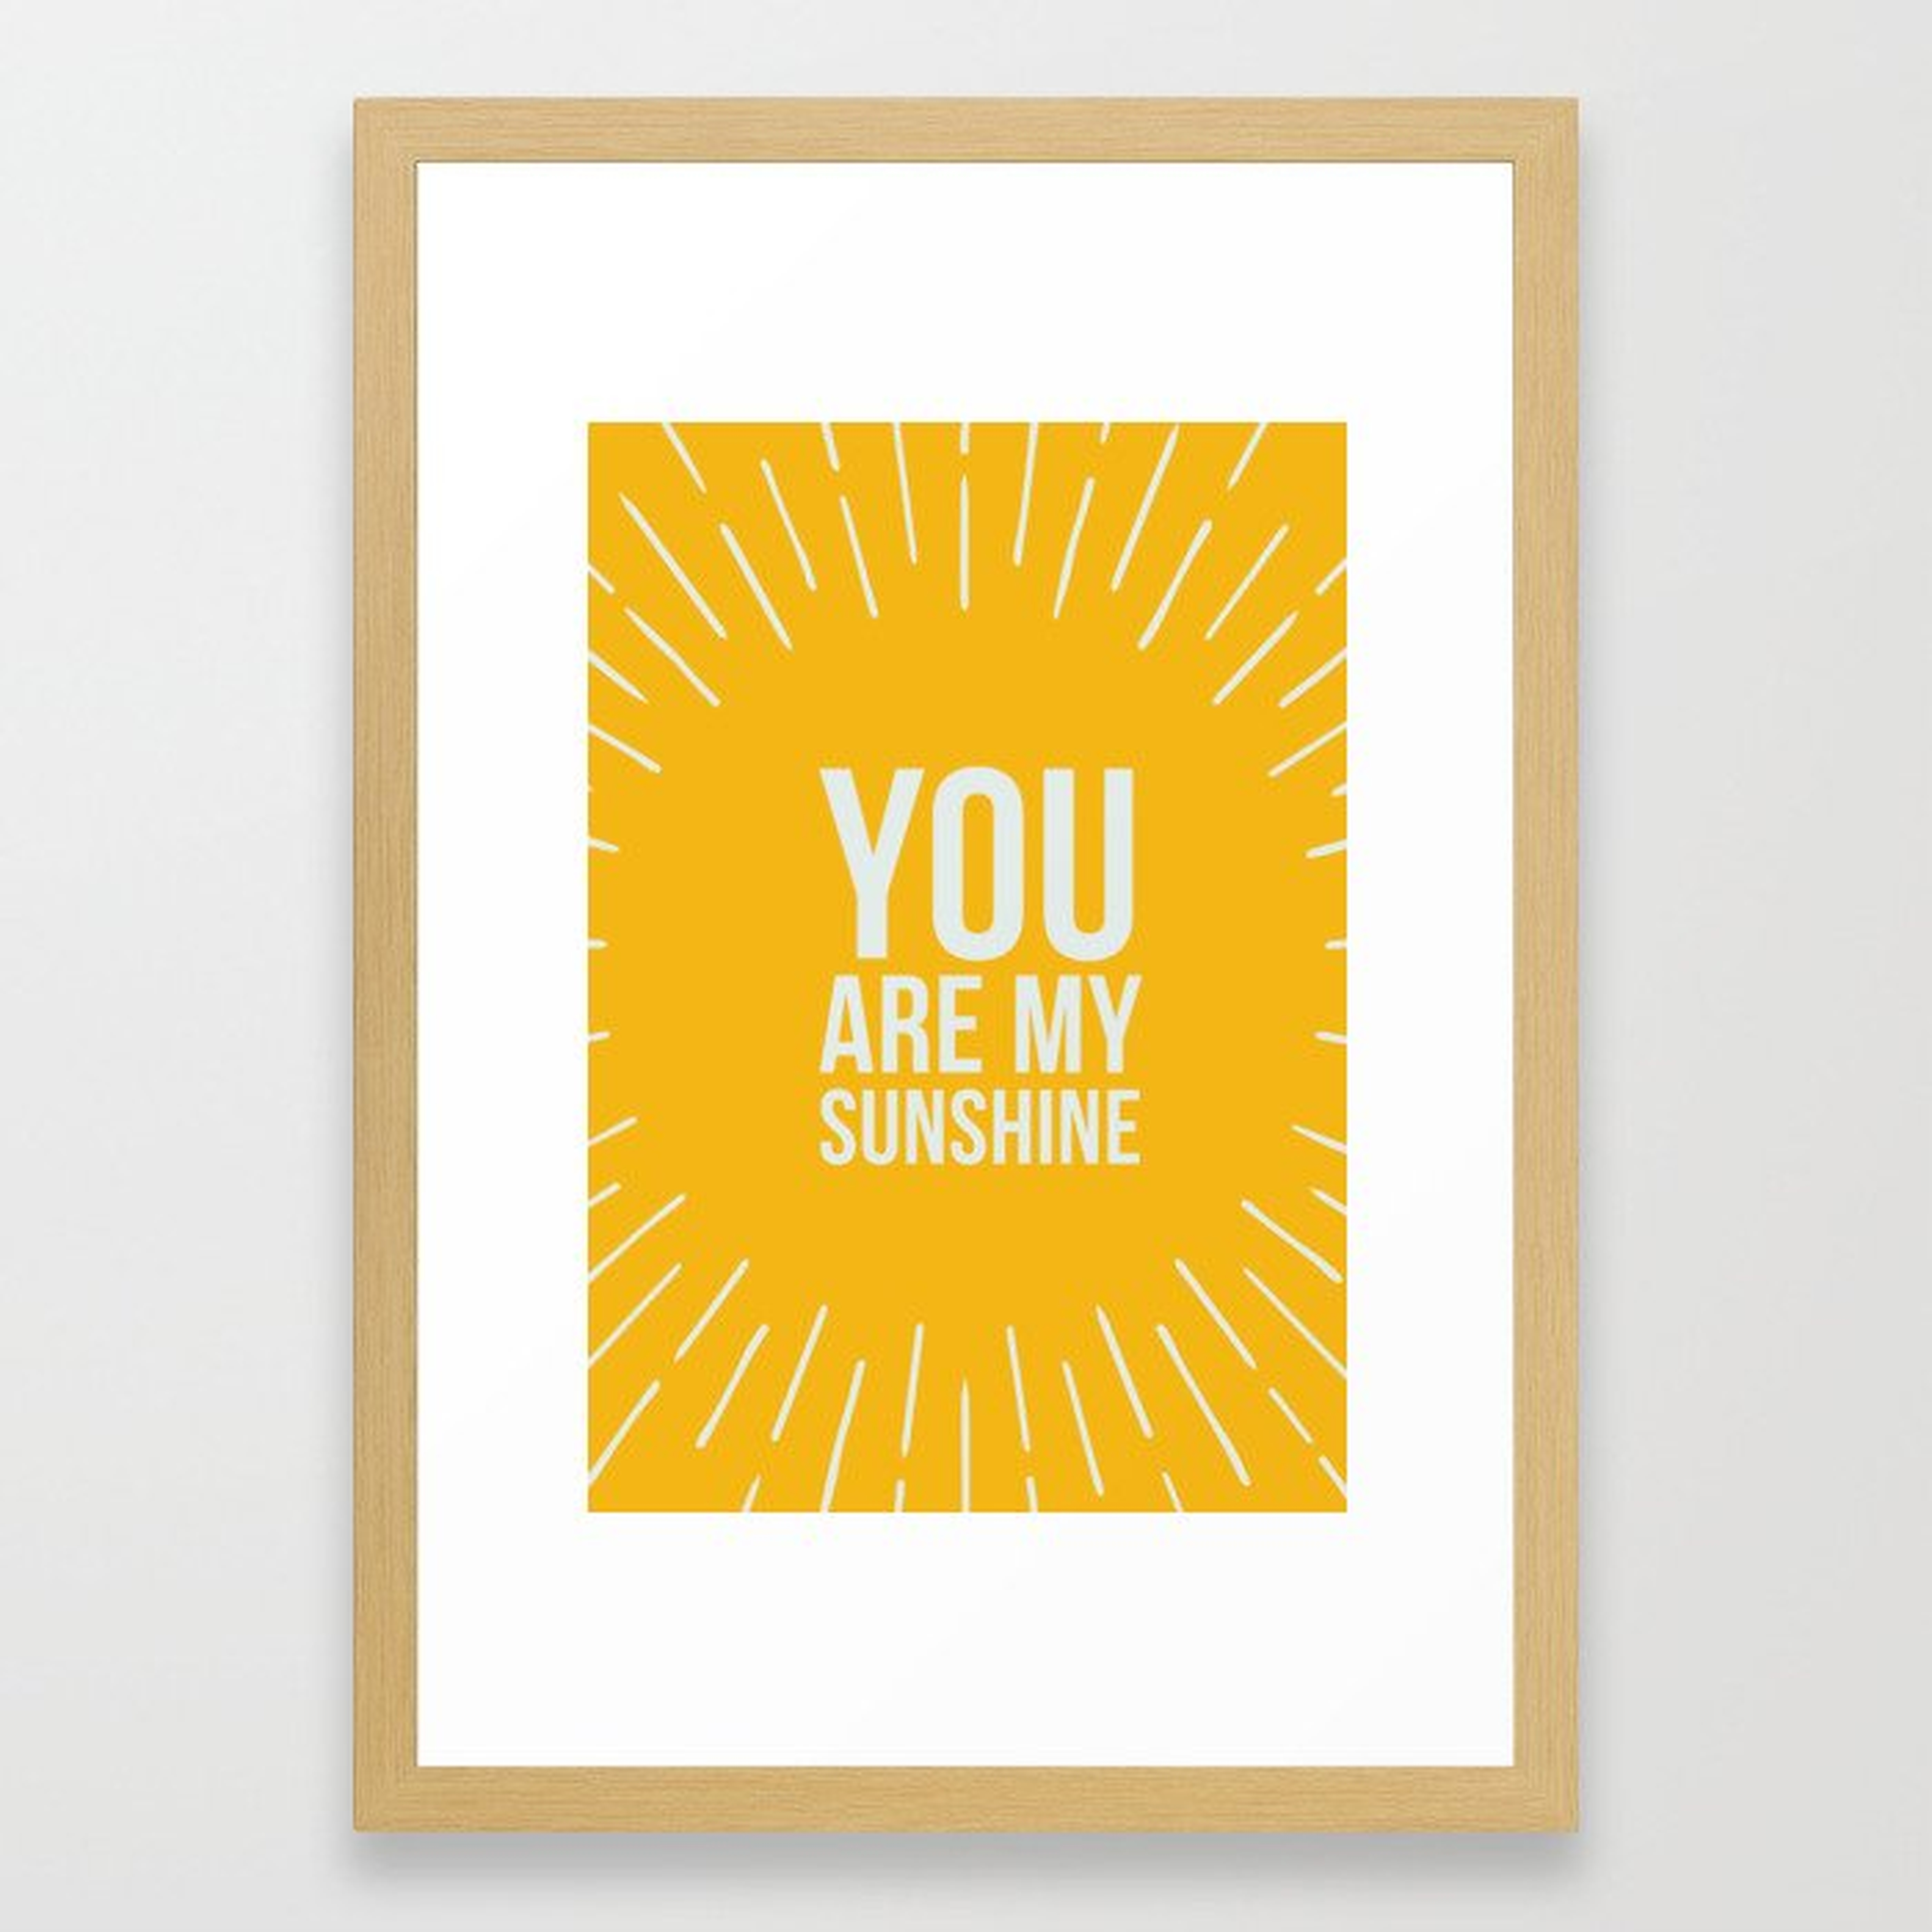 You Are My Sunshine Framed Art Print by Mr. Ick - Society6